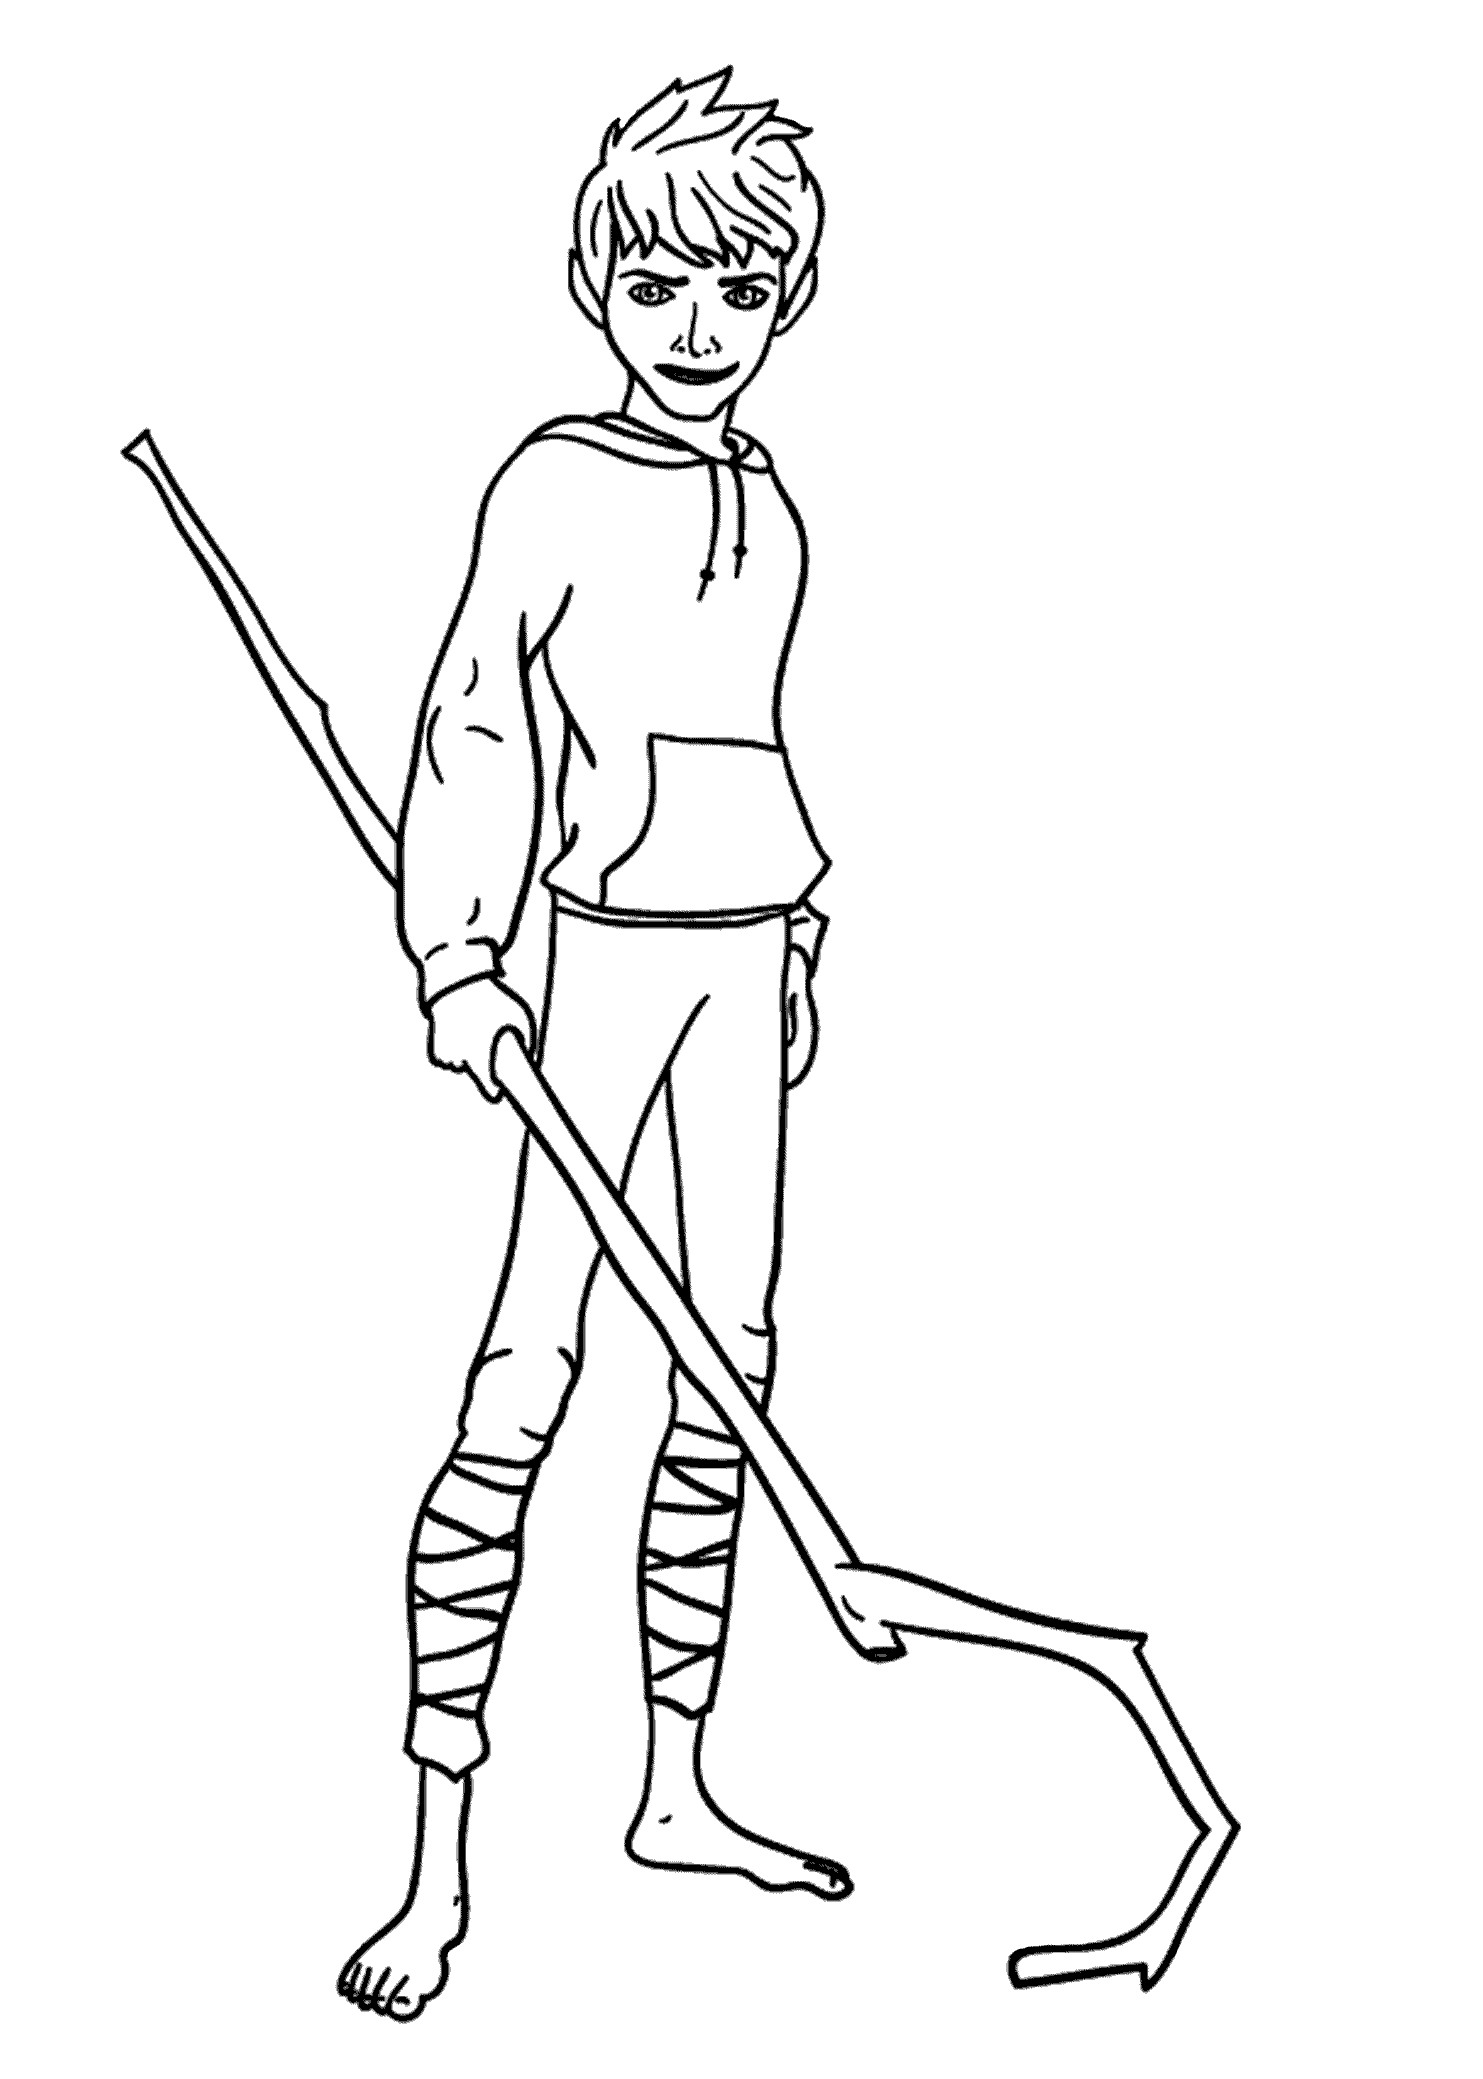 jack frost coloring pages jack frost from rise of the guardians coloring page free pages jack coloring frost 